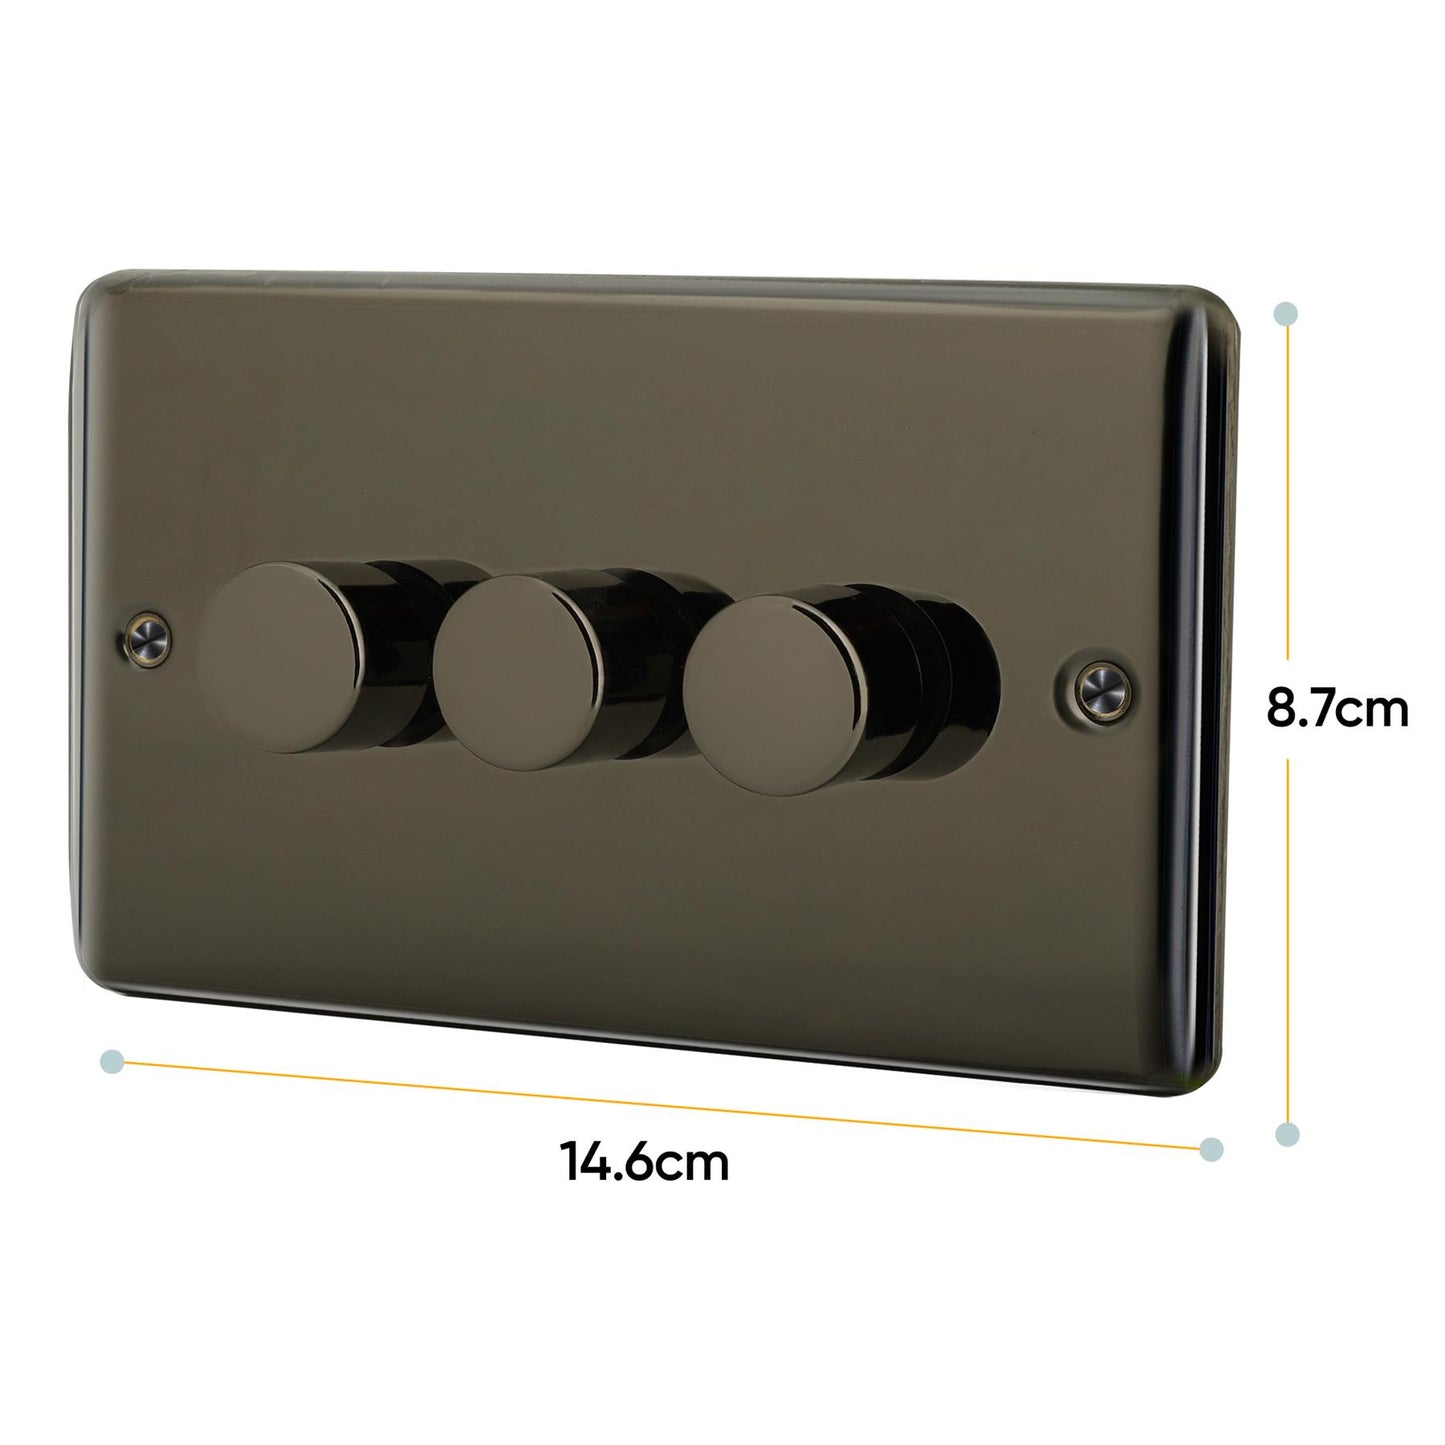 Polished Nickel Steel Light Switches USB Sockets Fuse Dimmer TV Cooker Switch